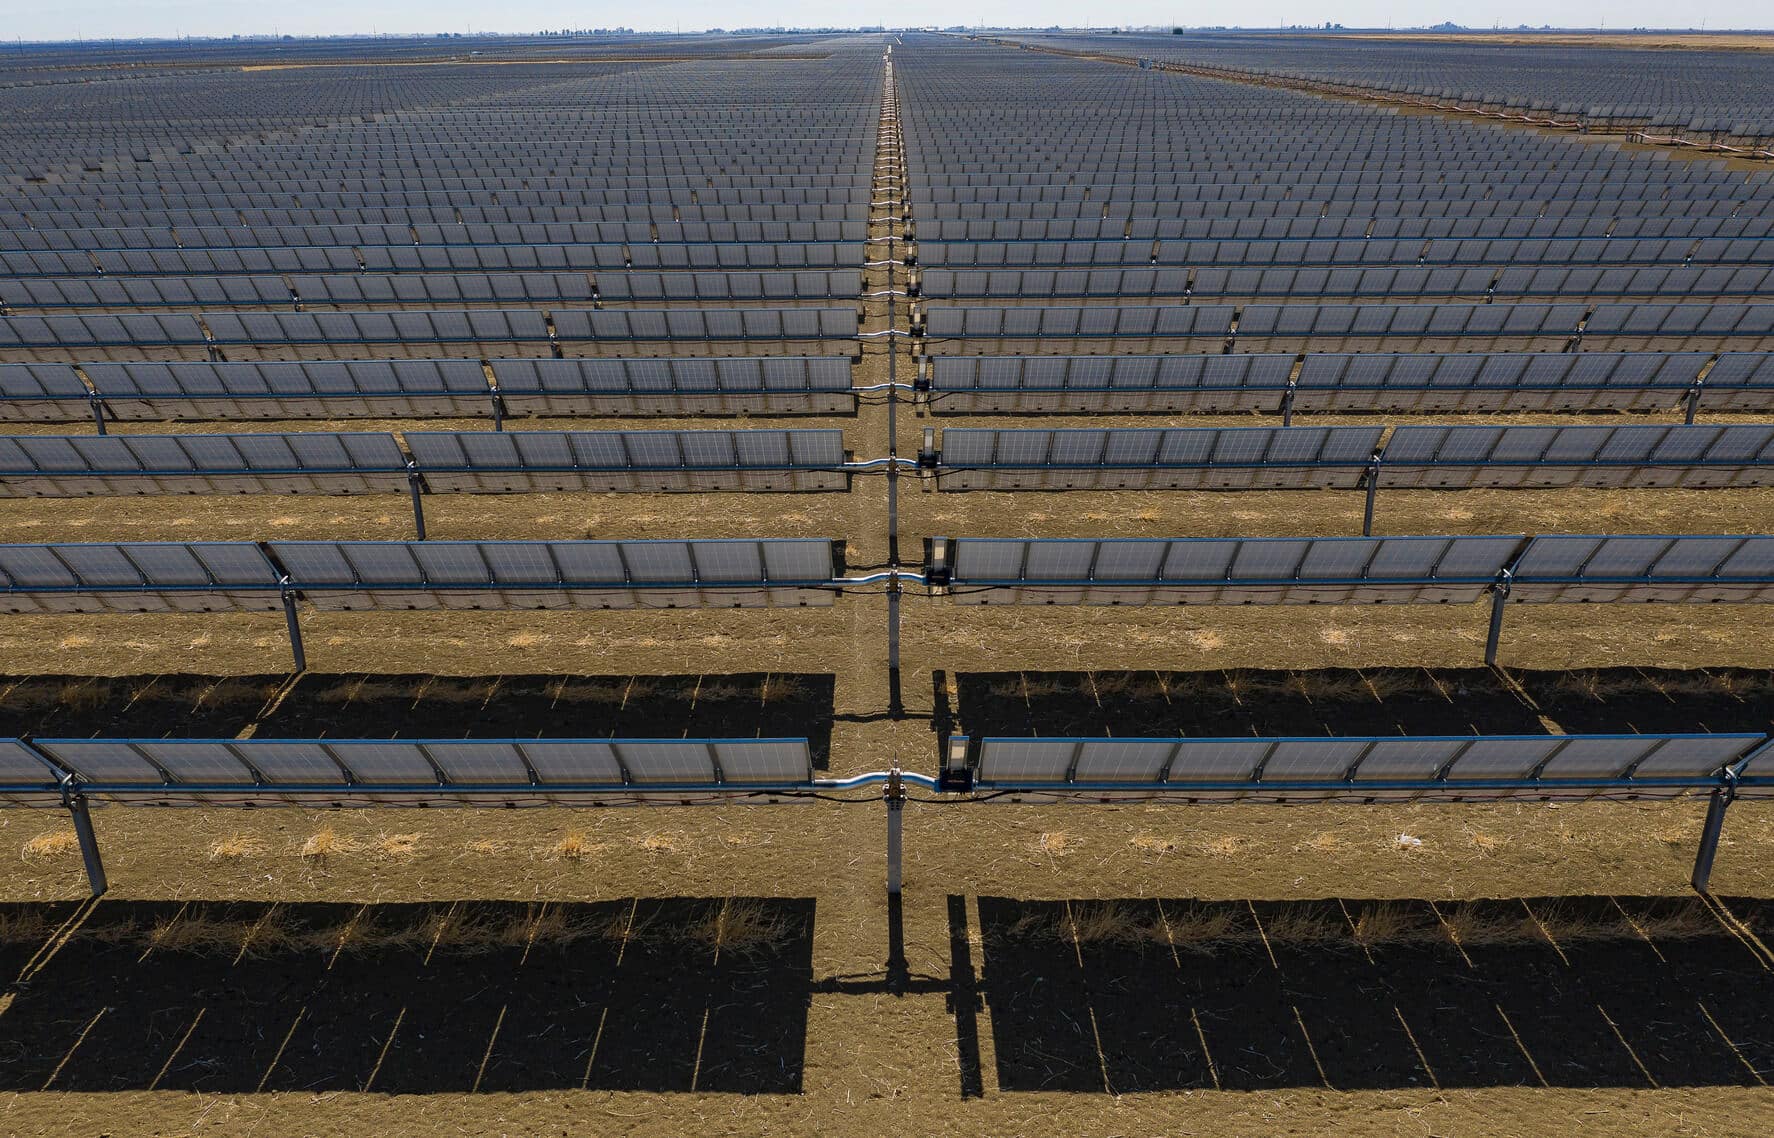 photovoltaic (PV) solar field